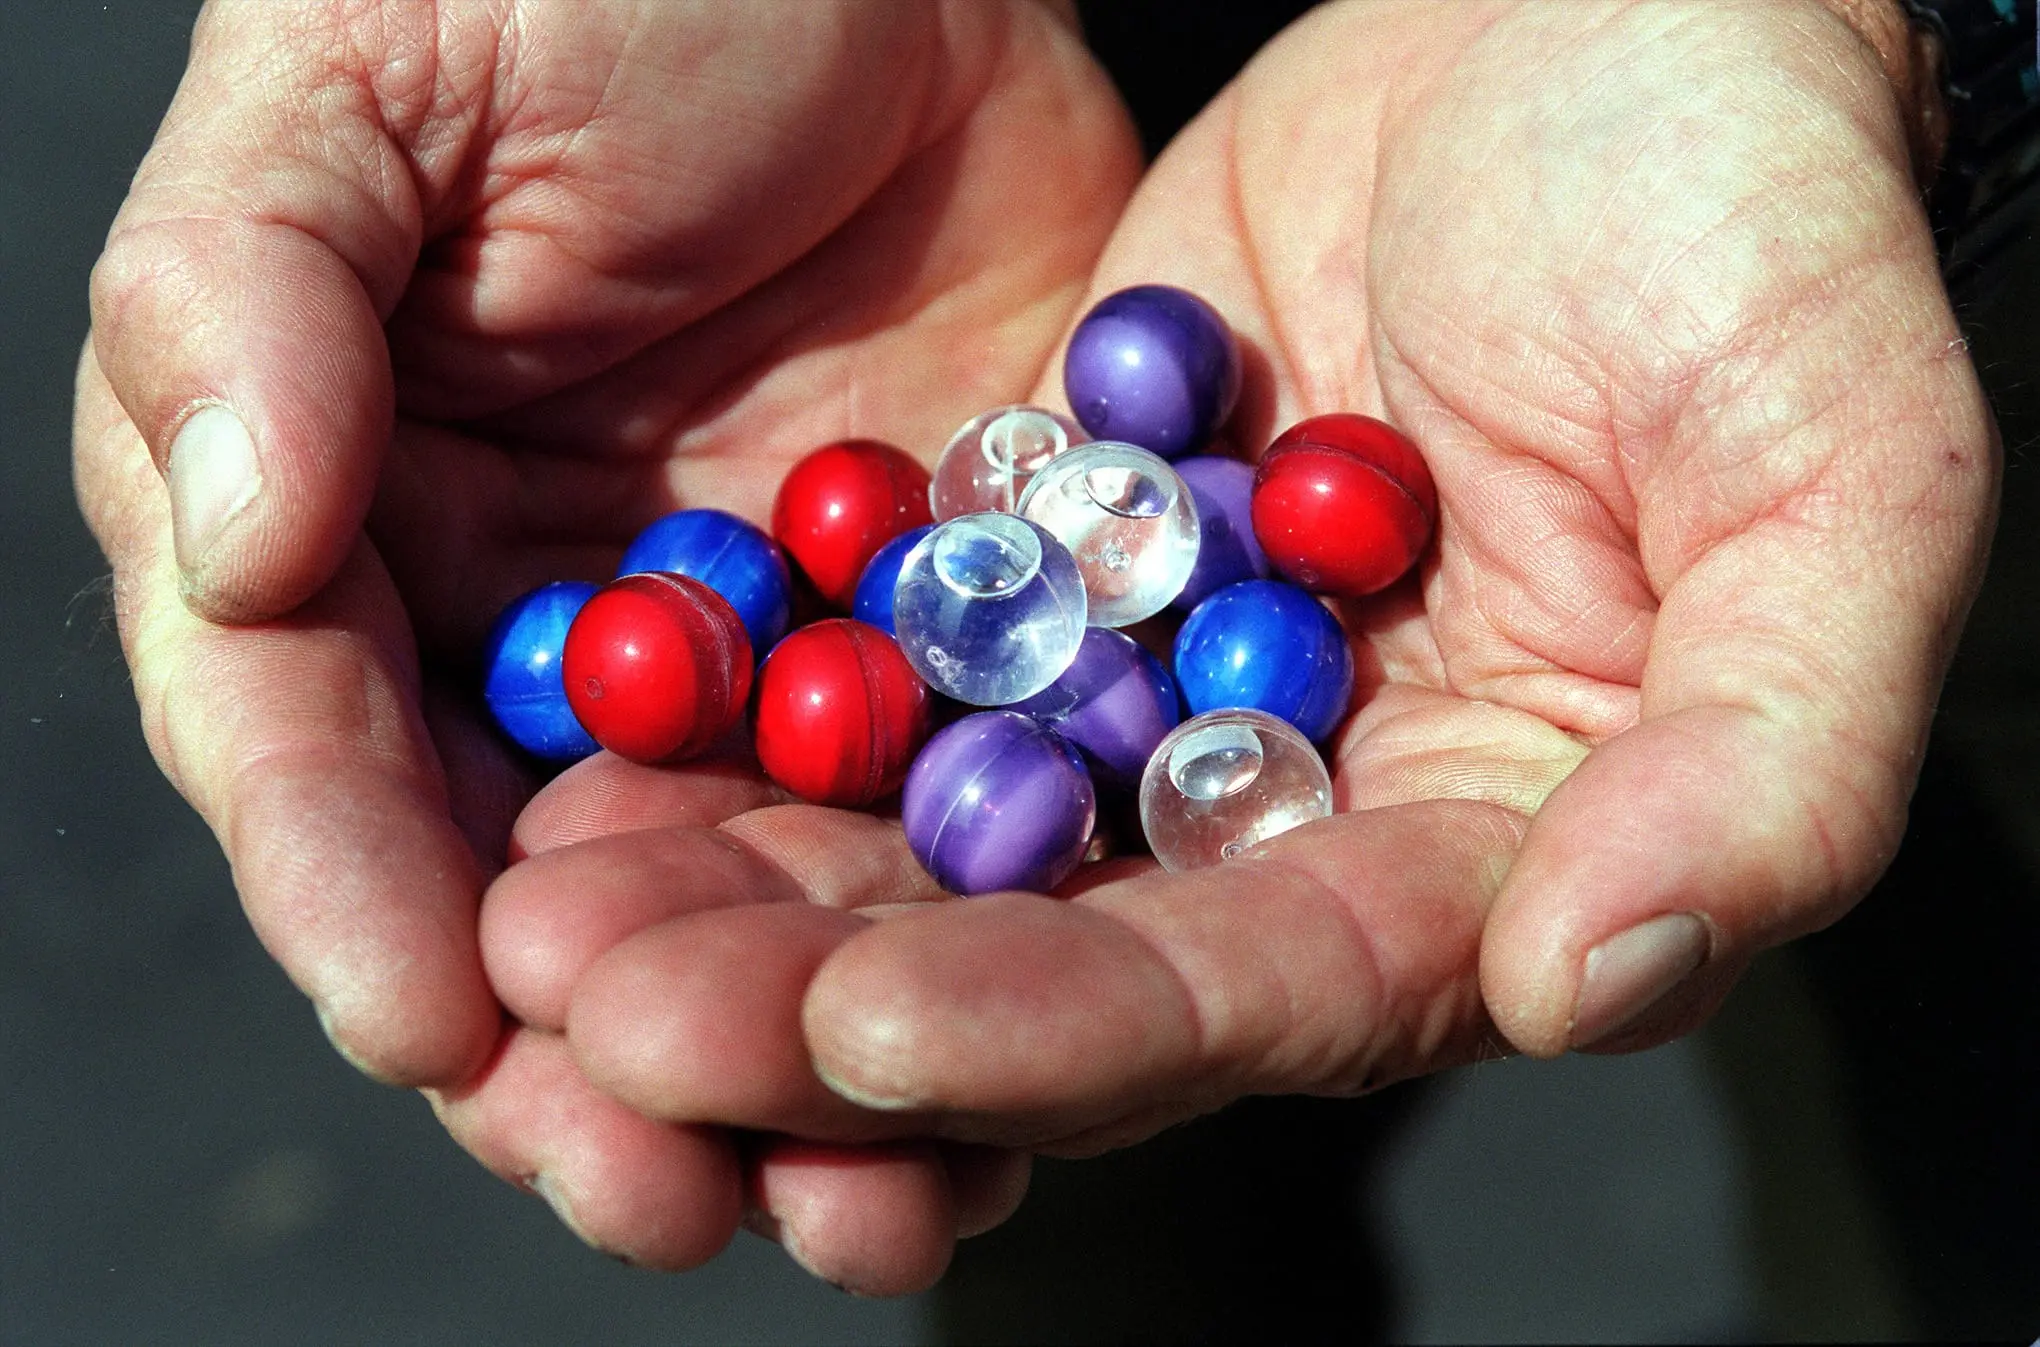 A pair of hands hold a pile of small colorful spheres.